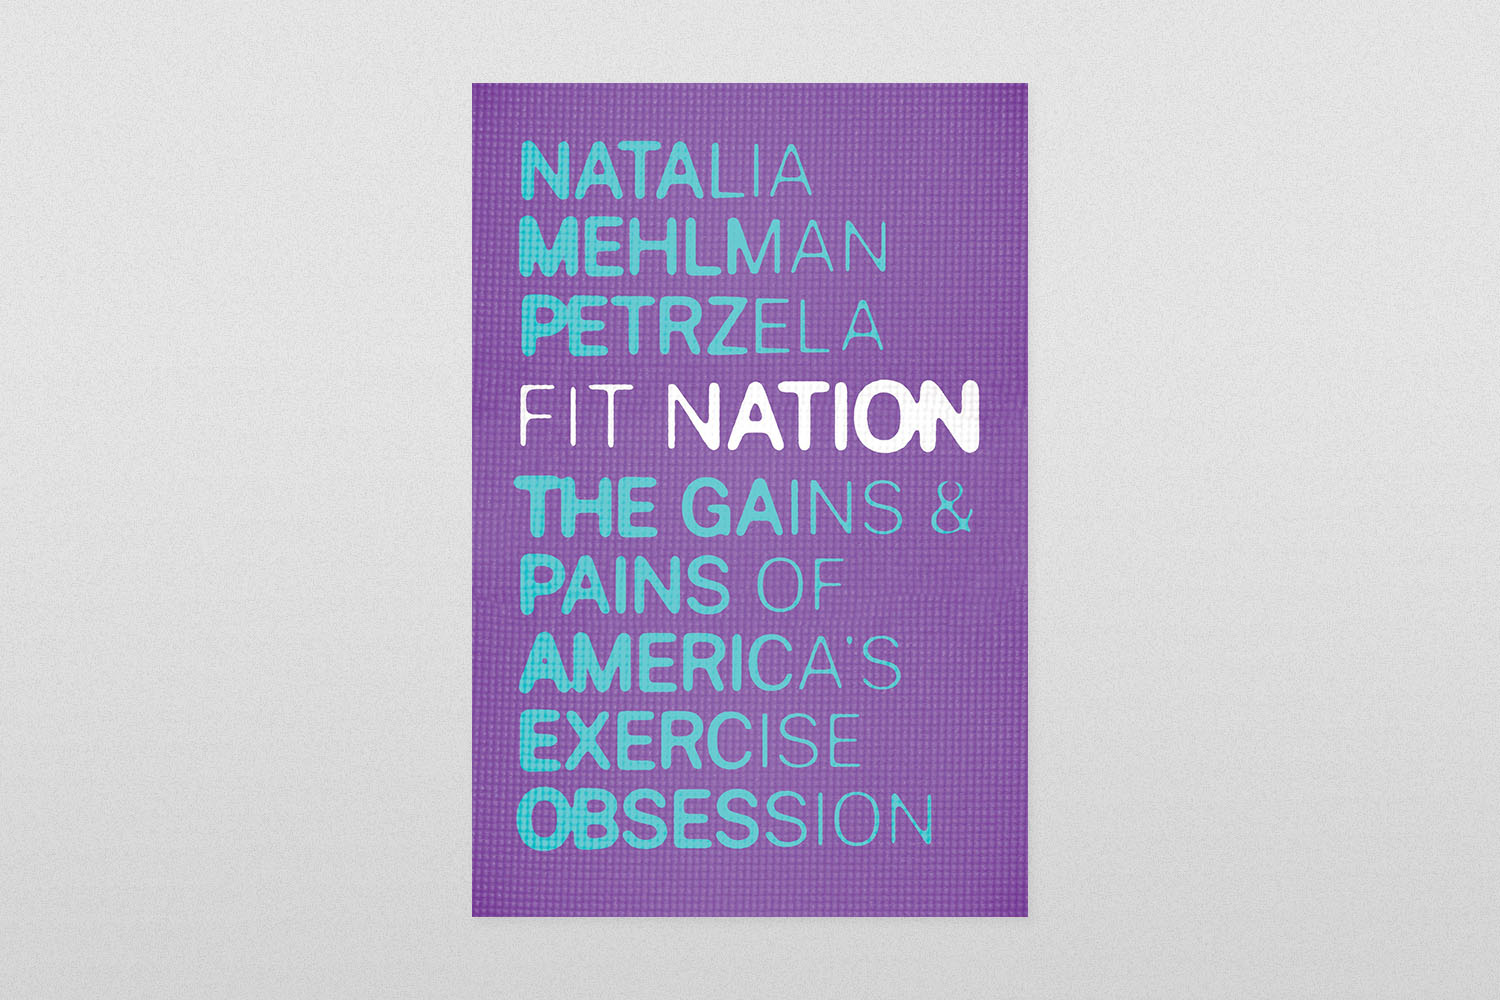 Fit Nation- The Gains and Pains of America's Exercise Obsession by Natalia Mehlman Petrzela